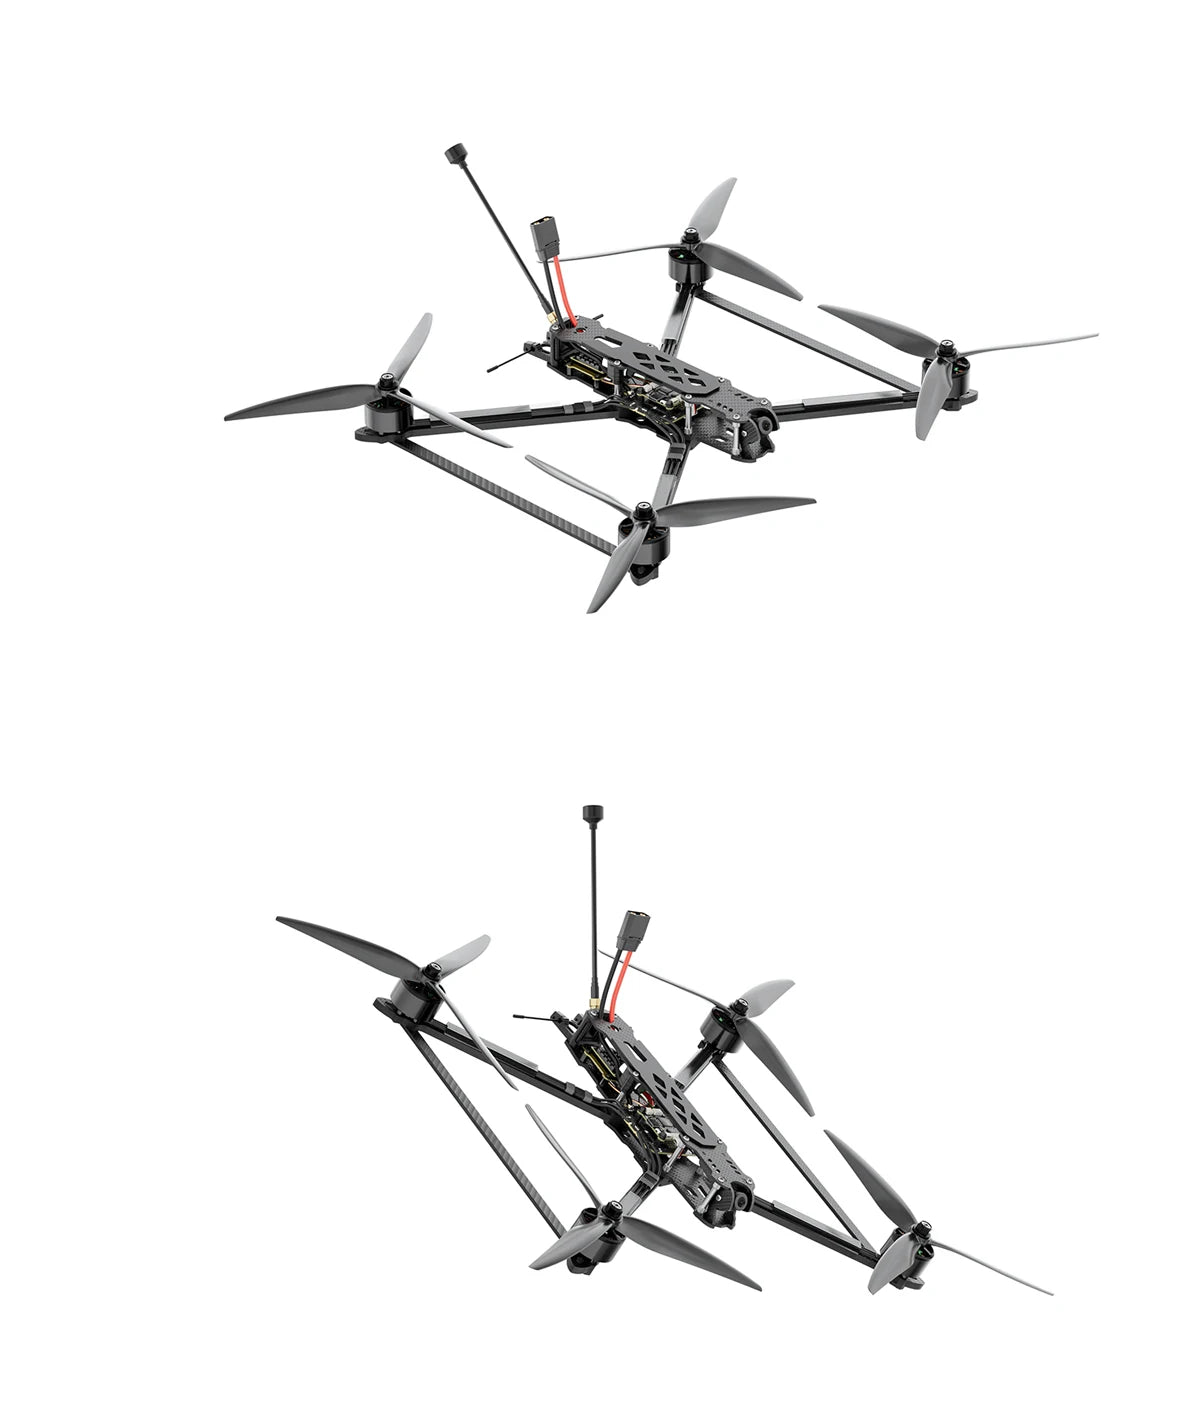 GEPRC MARK4 LR10 5.8G 2.5W Long Range FPV, crashes when components have aged or been damaged .